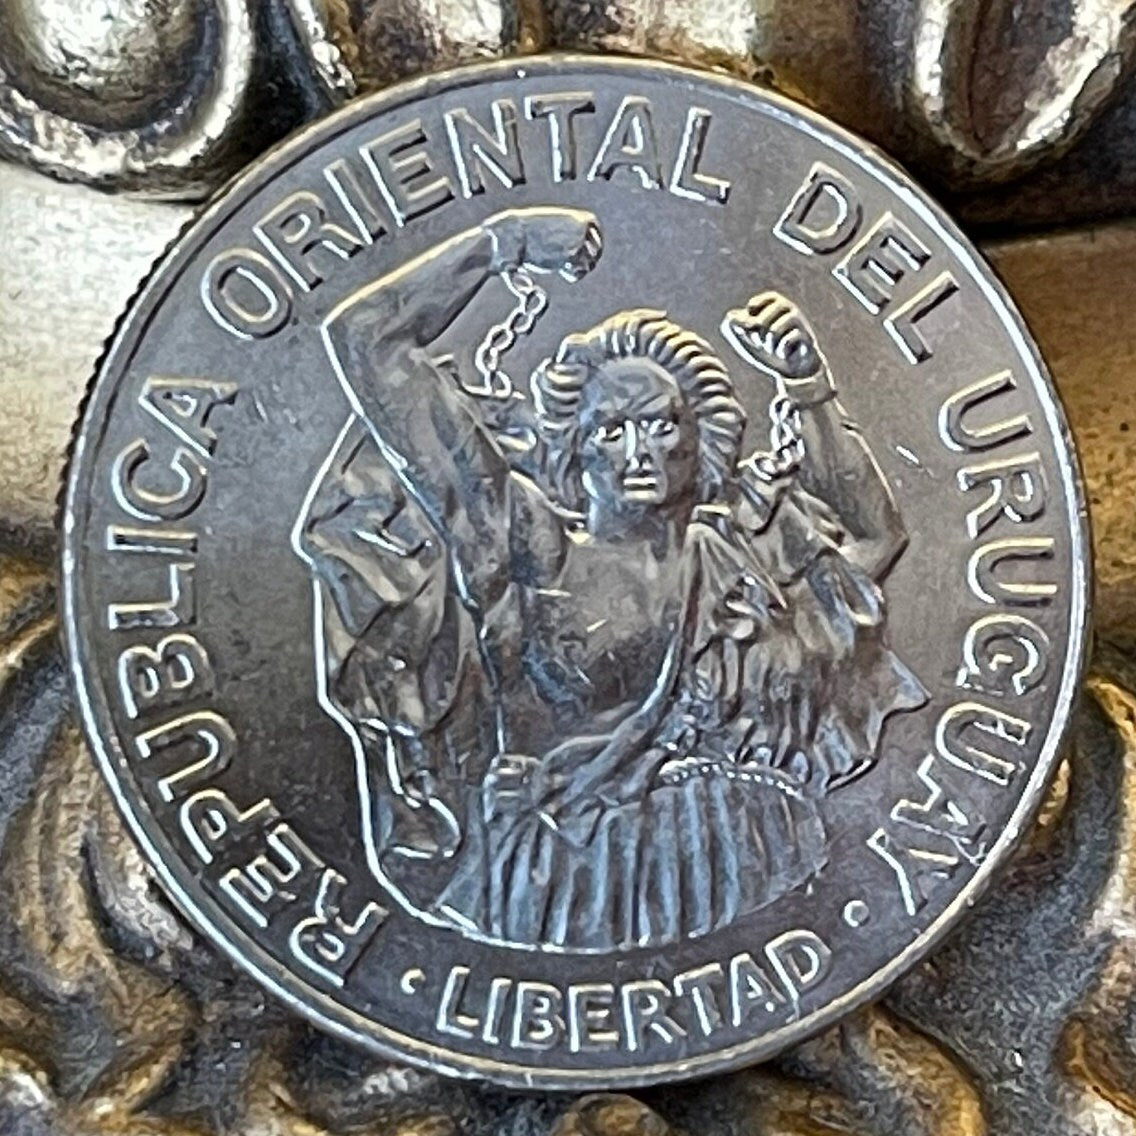 Liberty Breaks Chains on Obelisk of Montevideo 200 Nuevos Pesos Uruguay Authentic Coin Money for Jewelry (1989) (Raging Revolutionary)